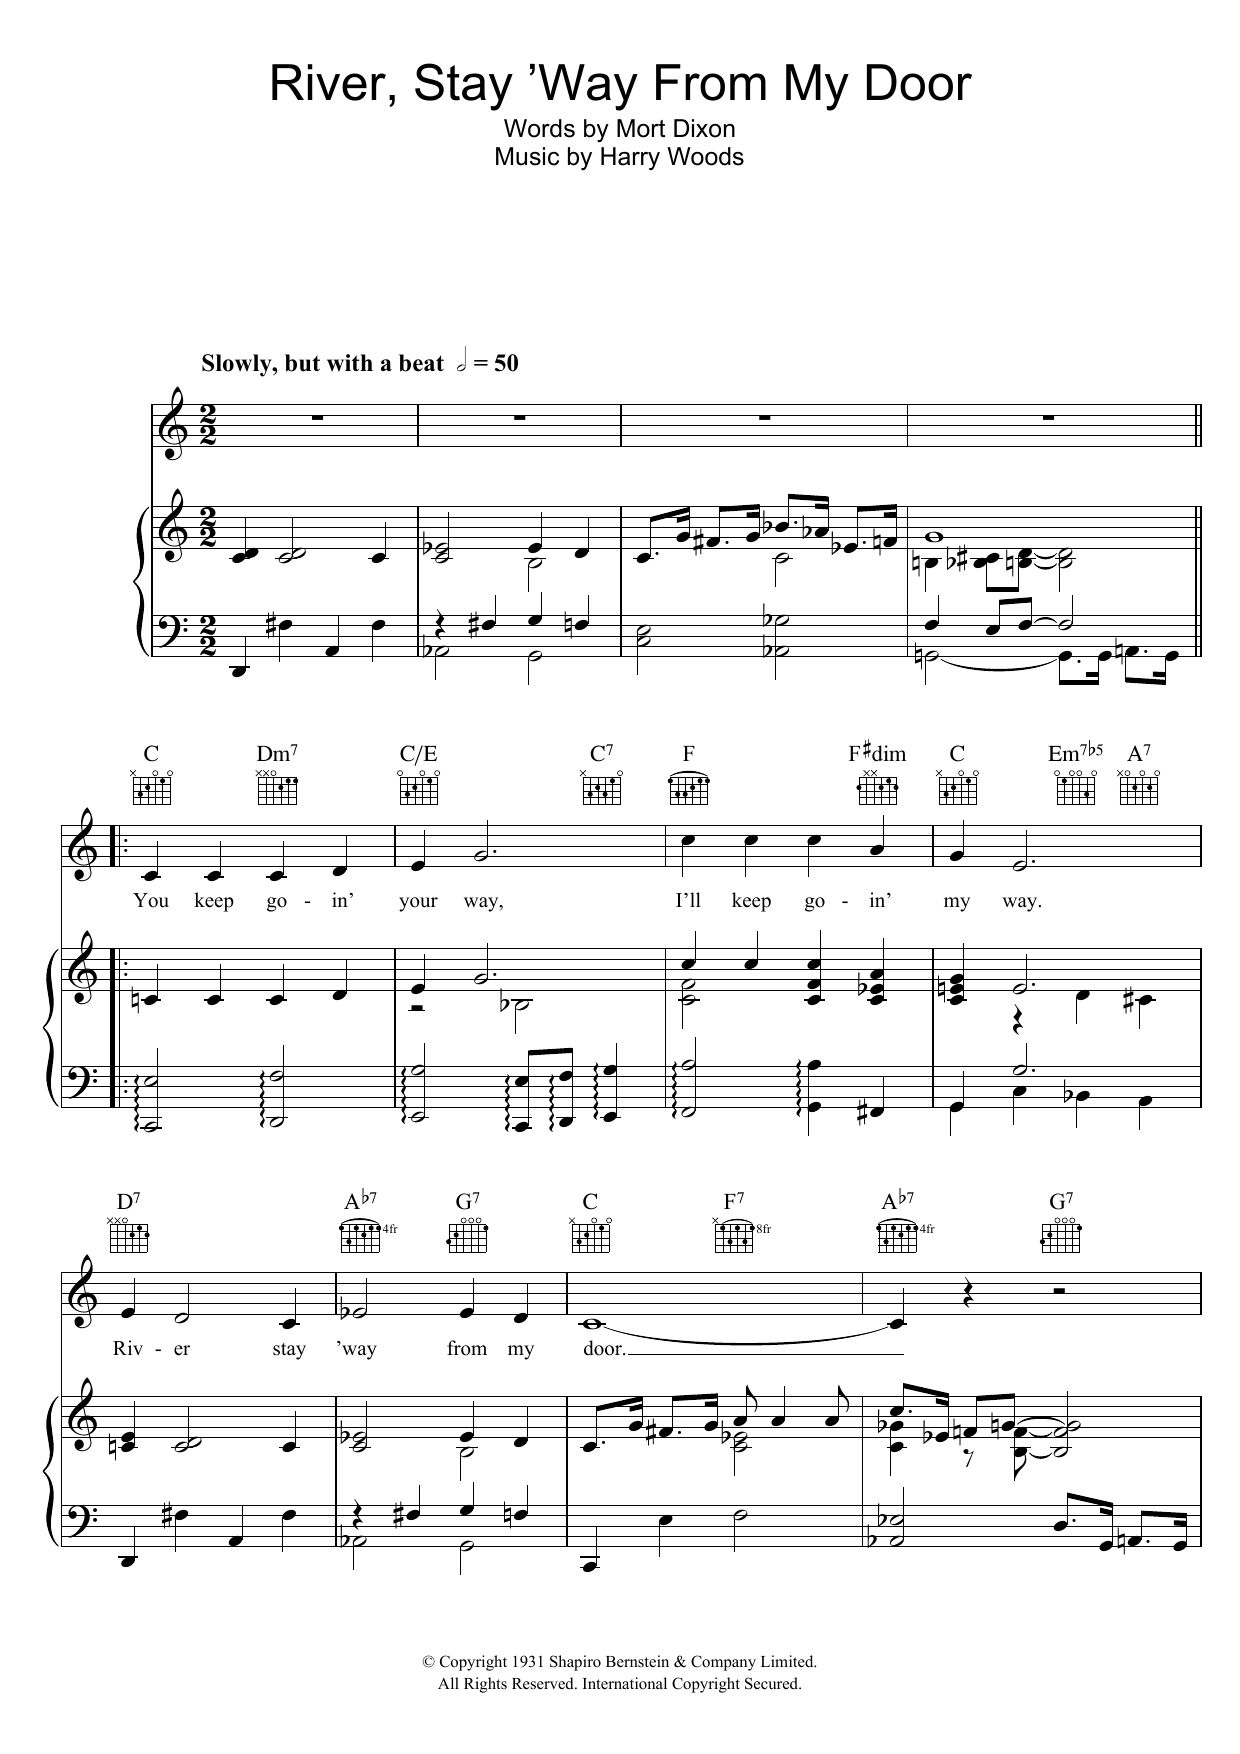 Download Frank Sinatra River Stay 'Way From My Door Sheet Music